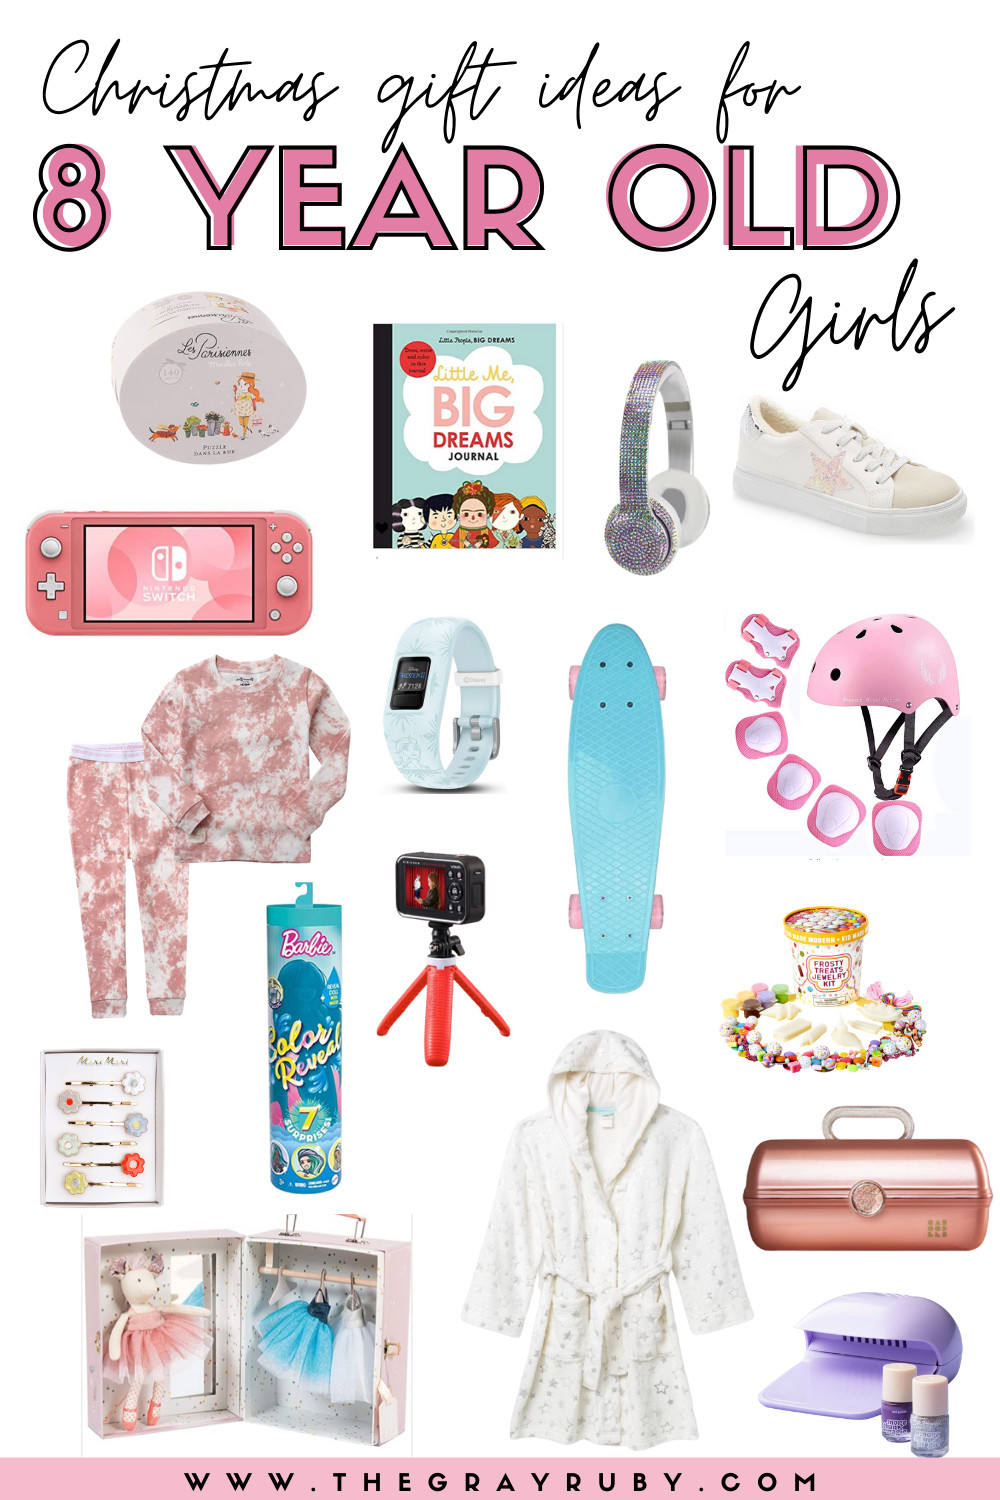 Girlfriend Xmas Gift Ideas
 Christmas Gift Ideas for 8 Year Old Girls The Gray Ruby